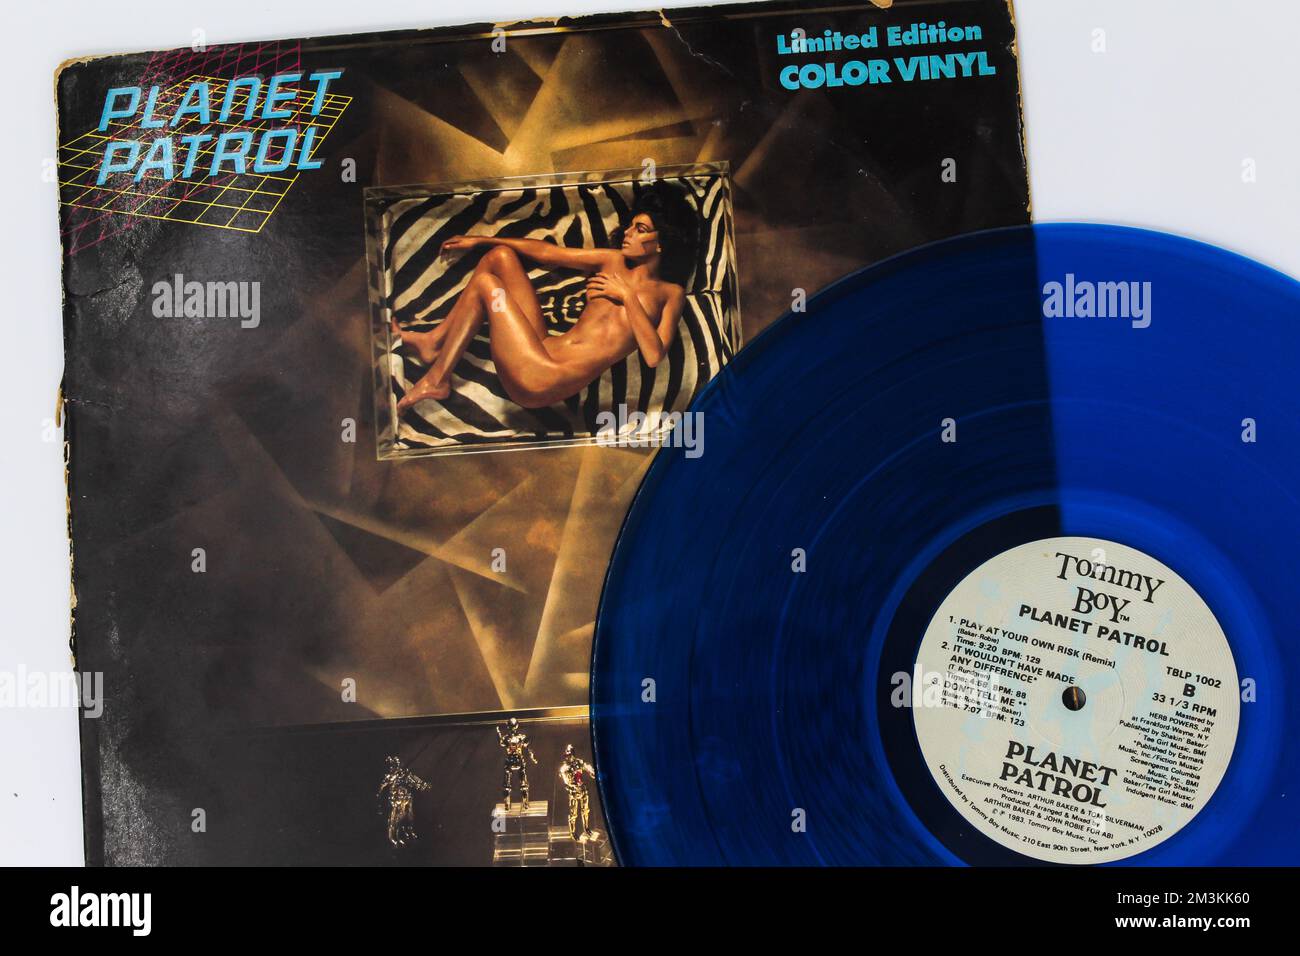 Planet Patrol is an American electro group originating in the 1980. Self titled album cover on LP vinyl disc. Stock Photo